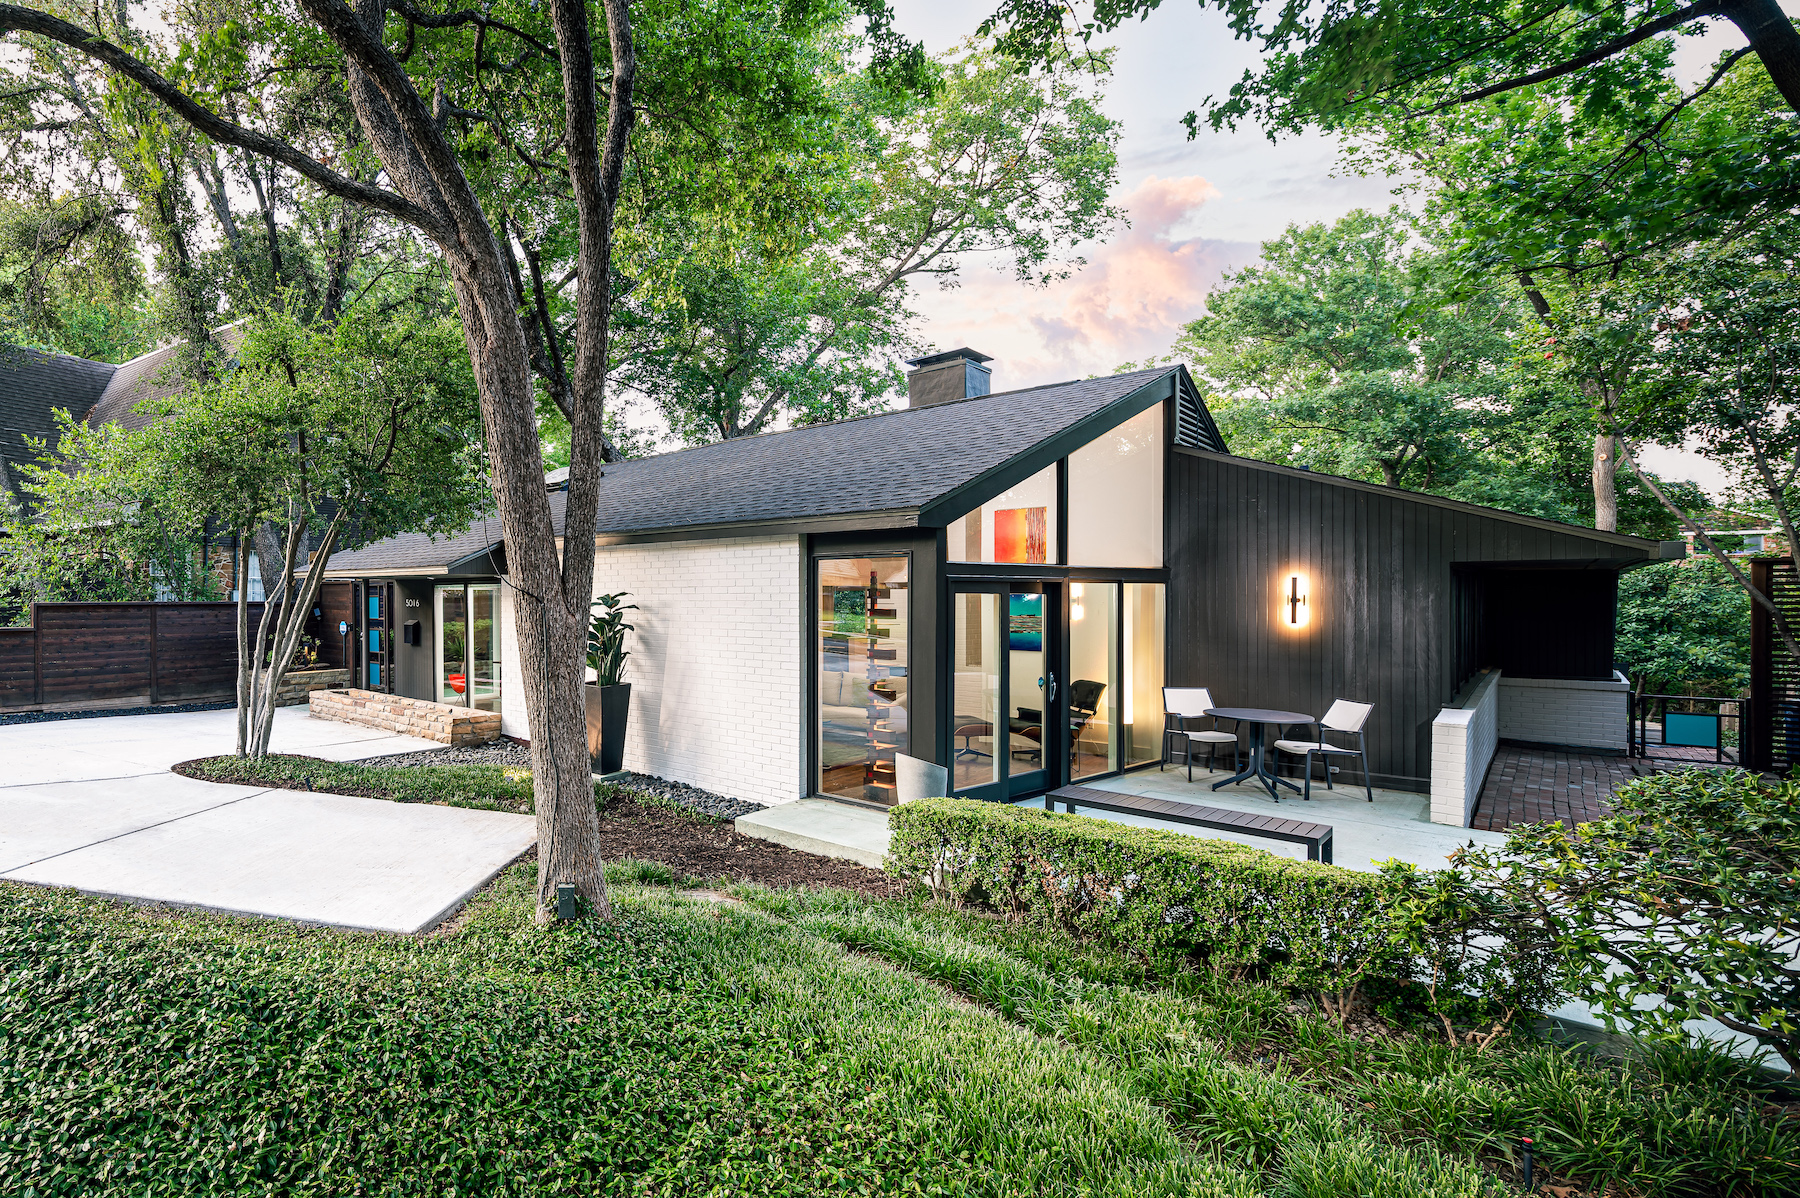 AIA Dallas’ Annual Tour of Homes Is Back This Weekend, Fully InPerson